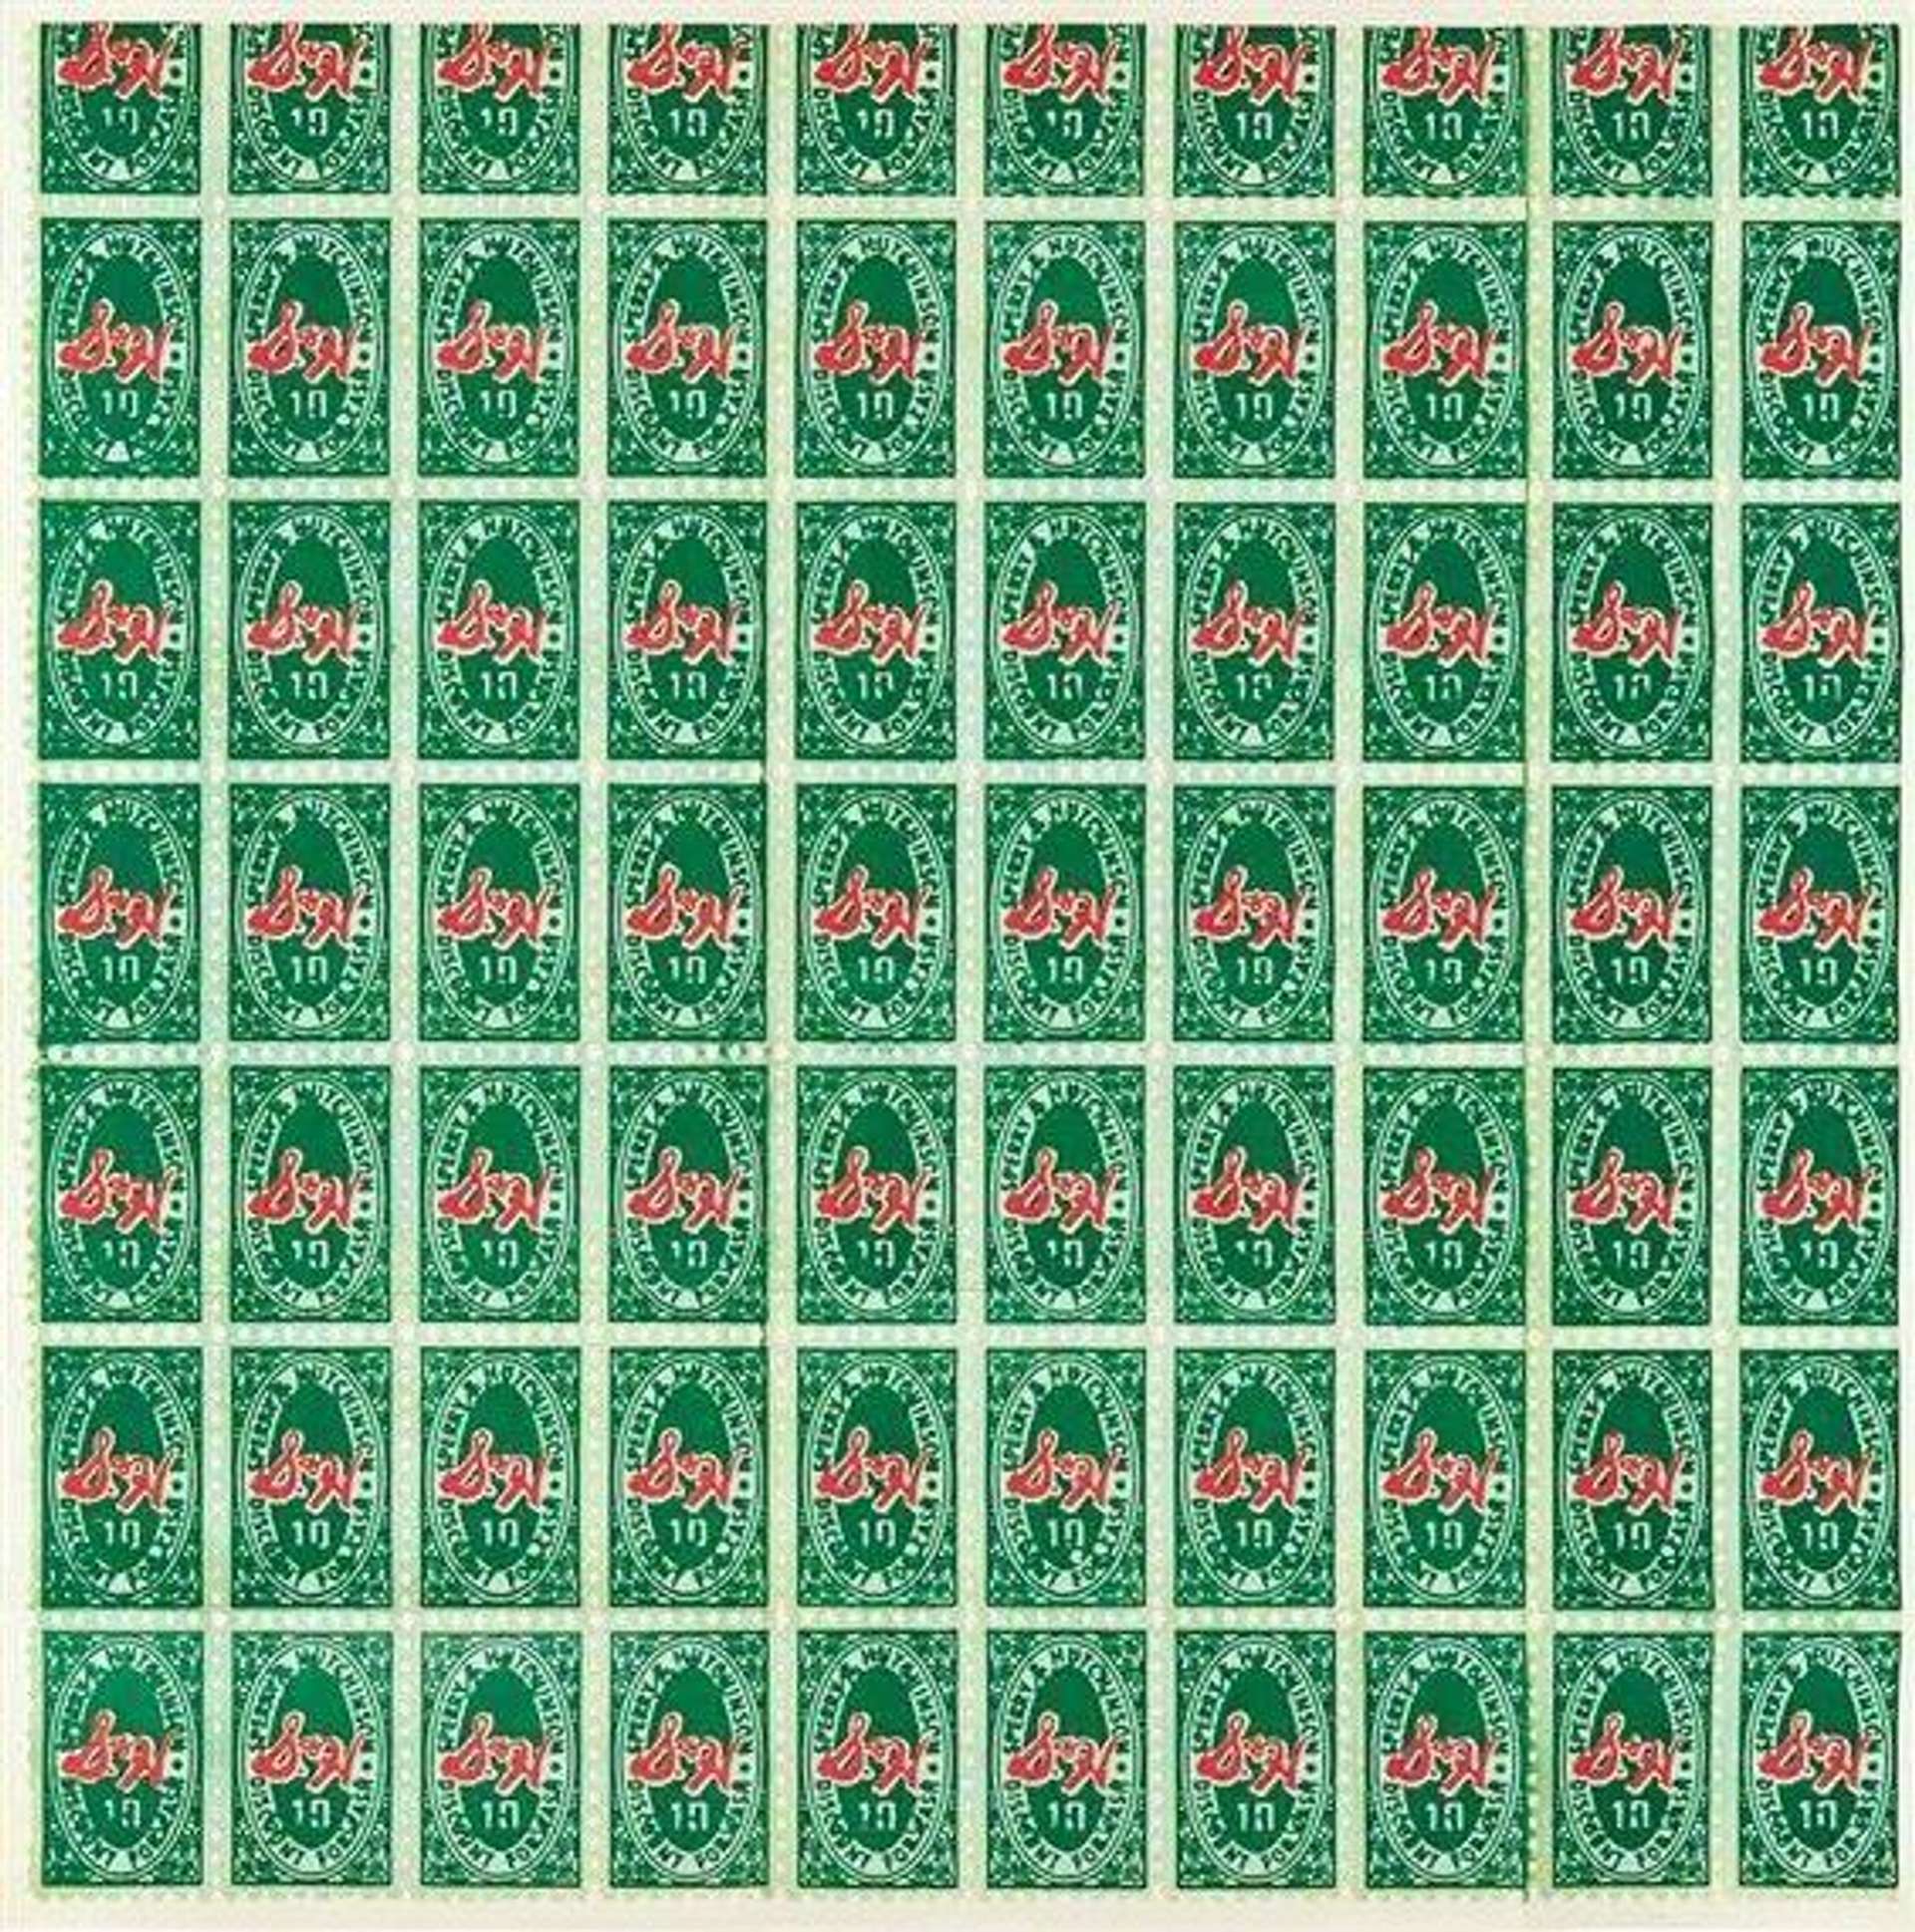 S. & H. Green Stamps (F. & S. II.9) - Unsigned Print by Andy Warhol 1965 - MyArtBroker